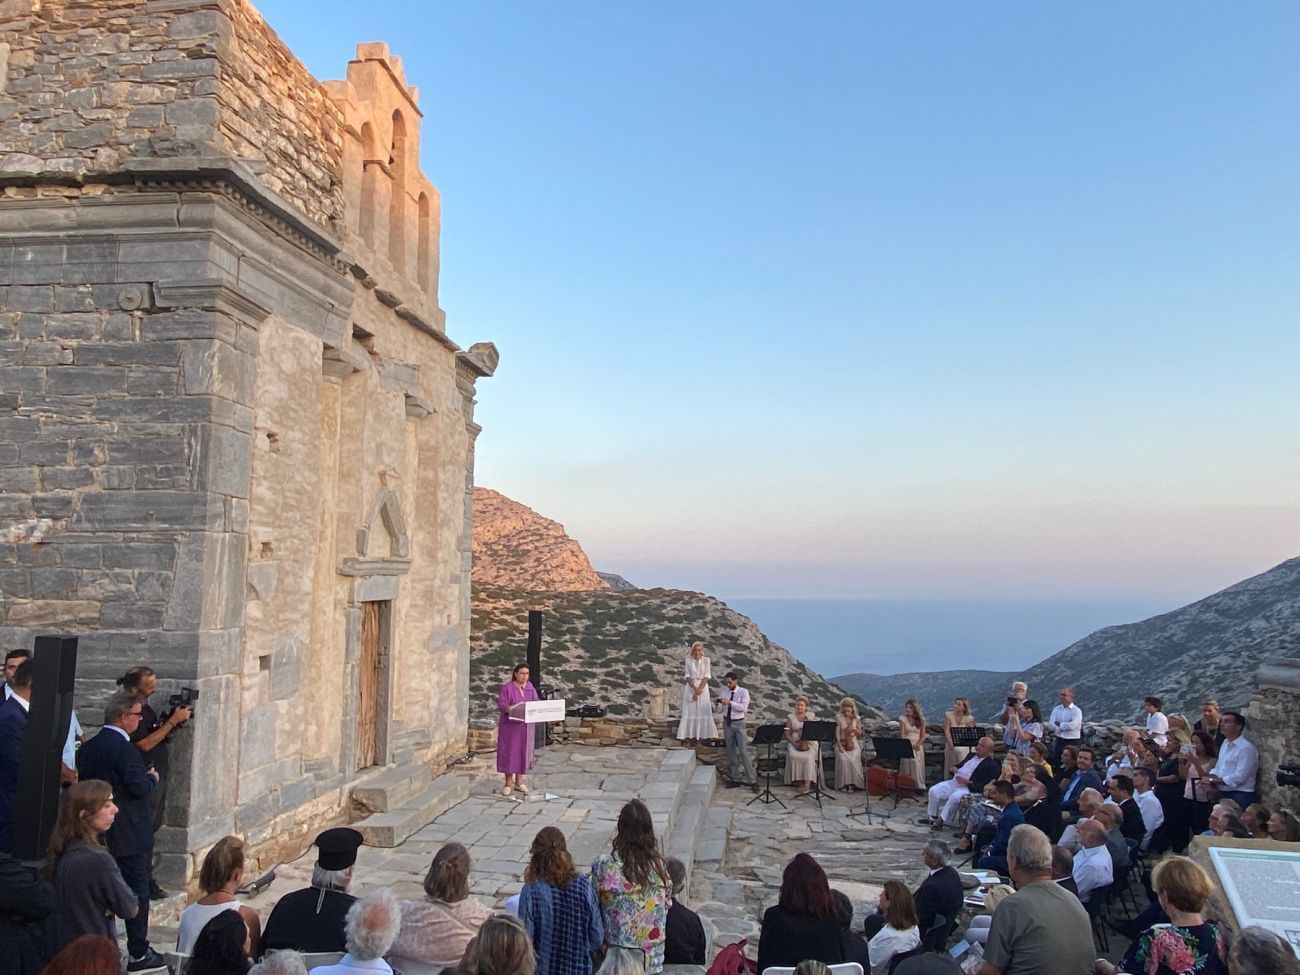 Greek Culture Minister Lina Mendoni speaking in front of the restored Monument of Episkopi on the island of Sikinos. Photo source: Culture Ministry